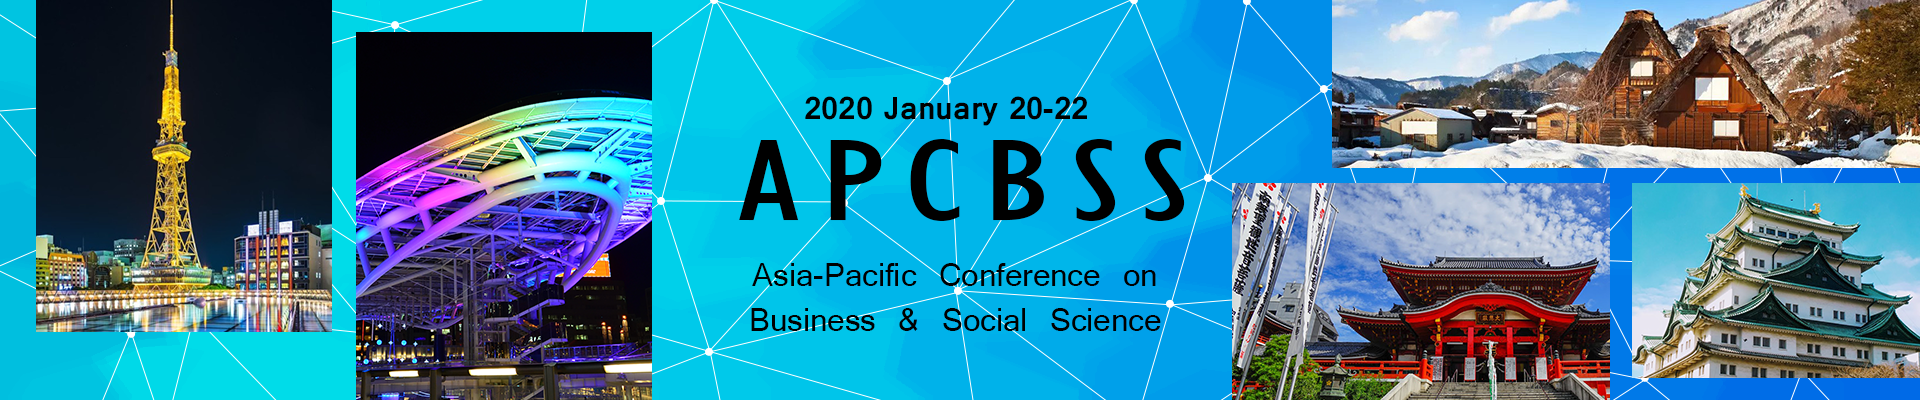 2020 Nagoya APCBSS Asia-Pacific Conference on Business & Social Science